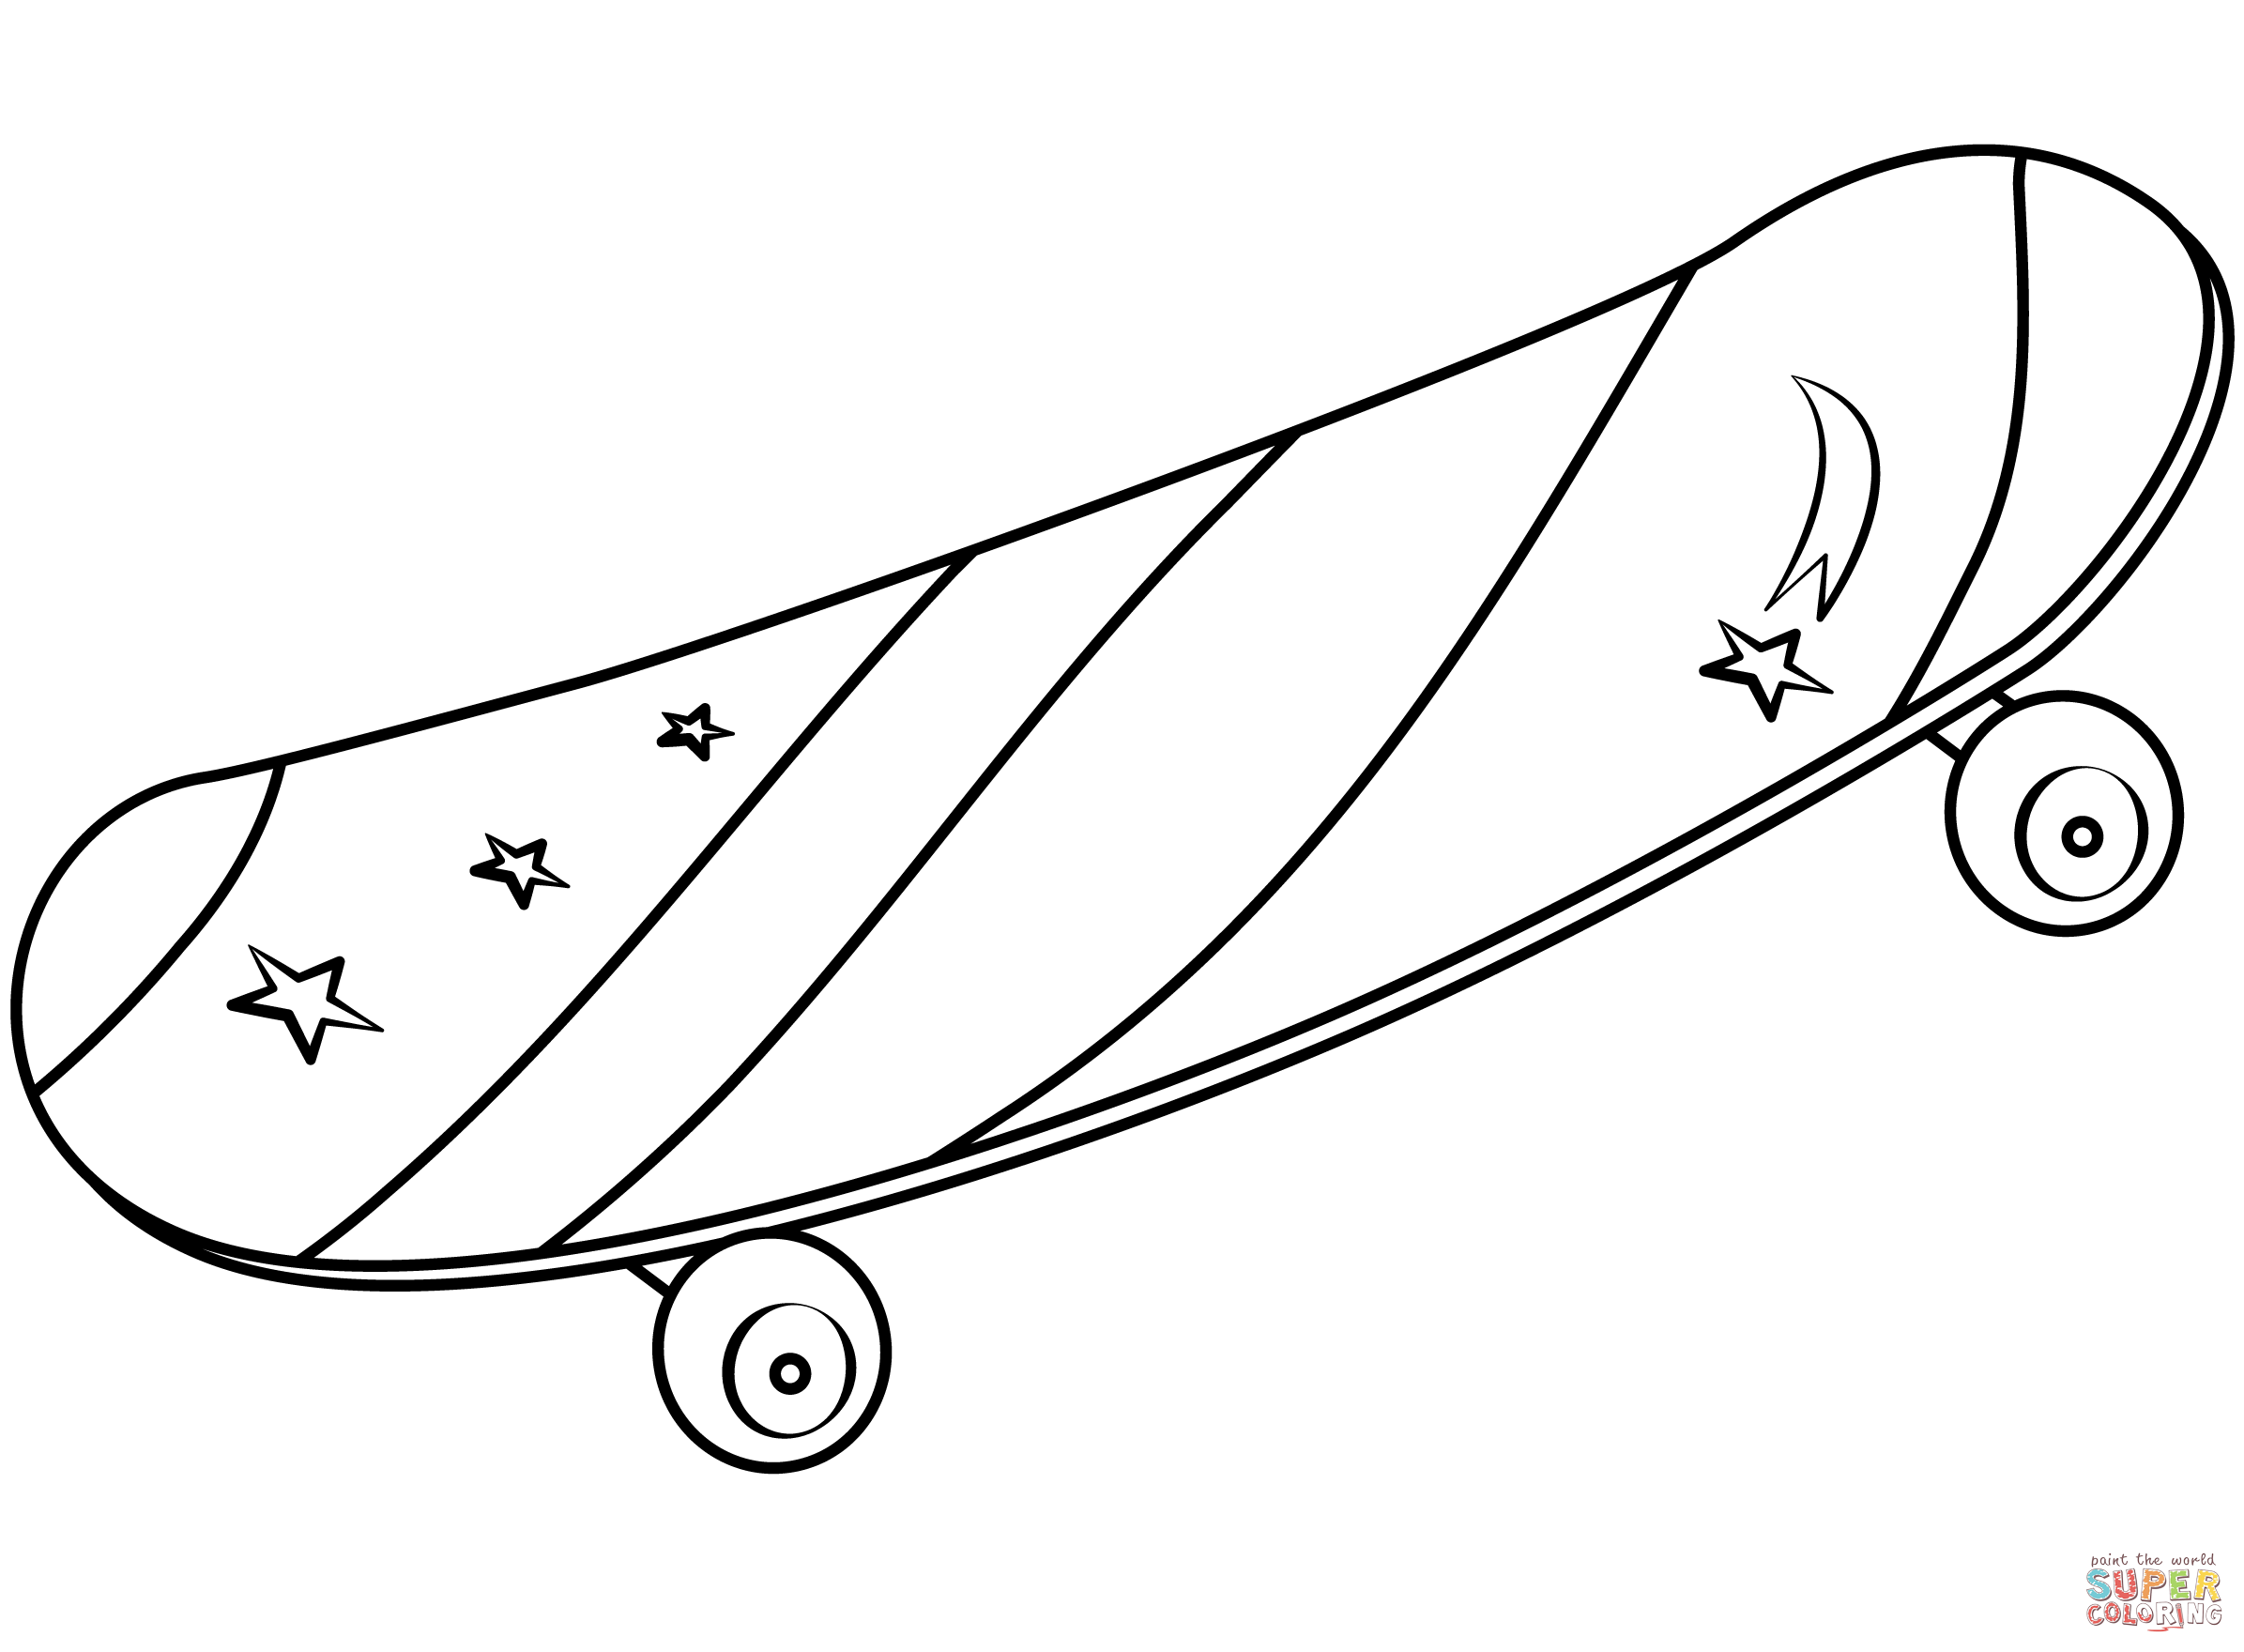 Skateboard coloring page free printable coloring pages